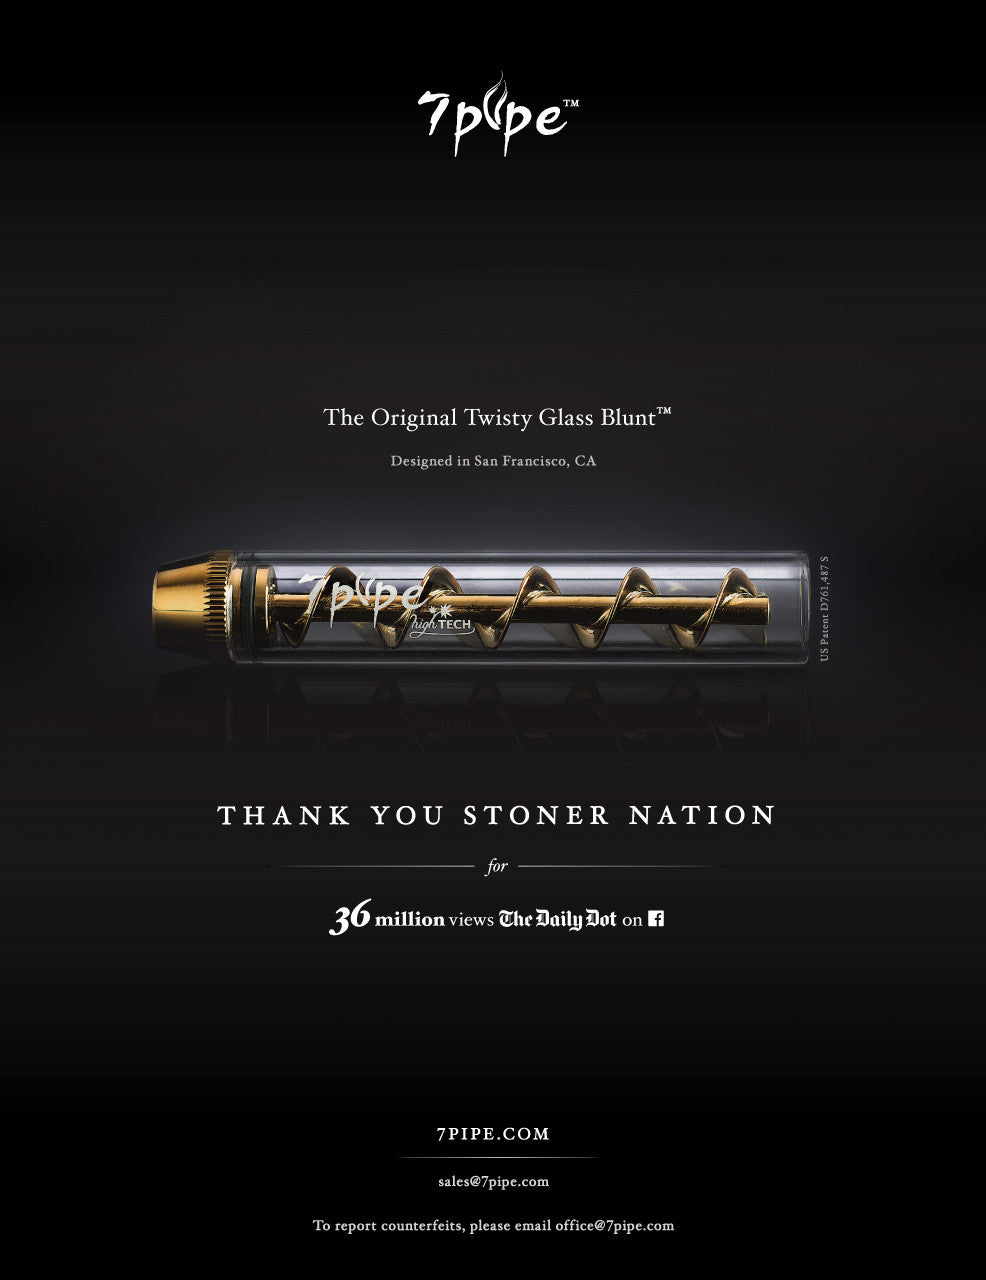 7PIPE Ad Gallery  |  Twisty Glass Blunt  |  Thank you Stoner Nation